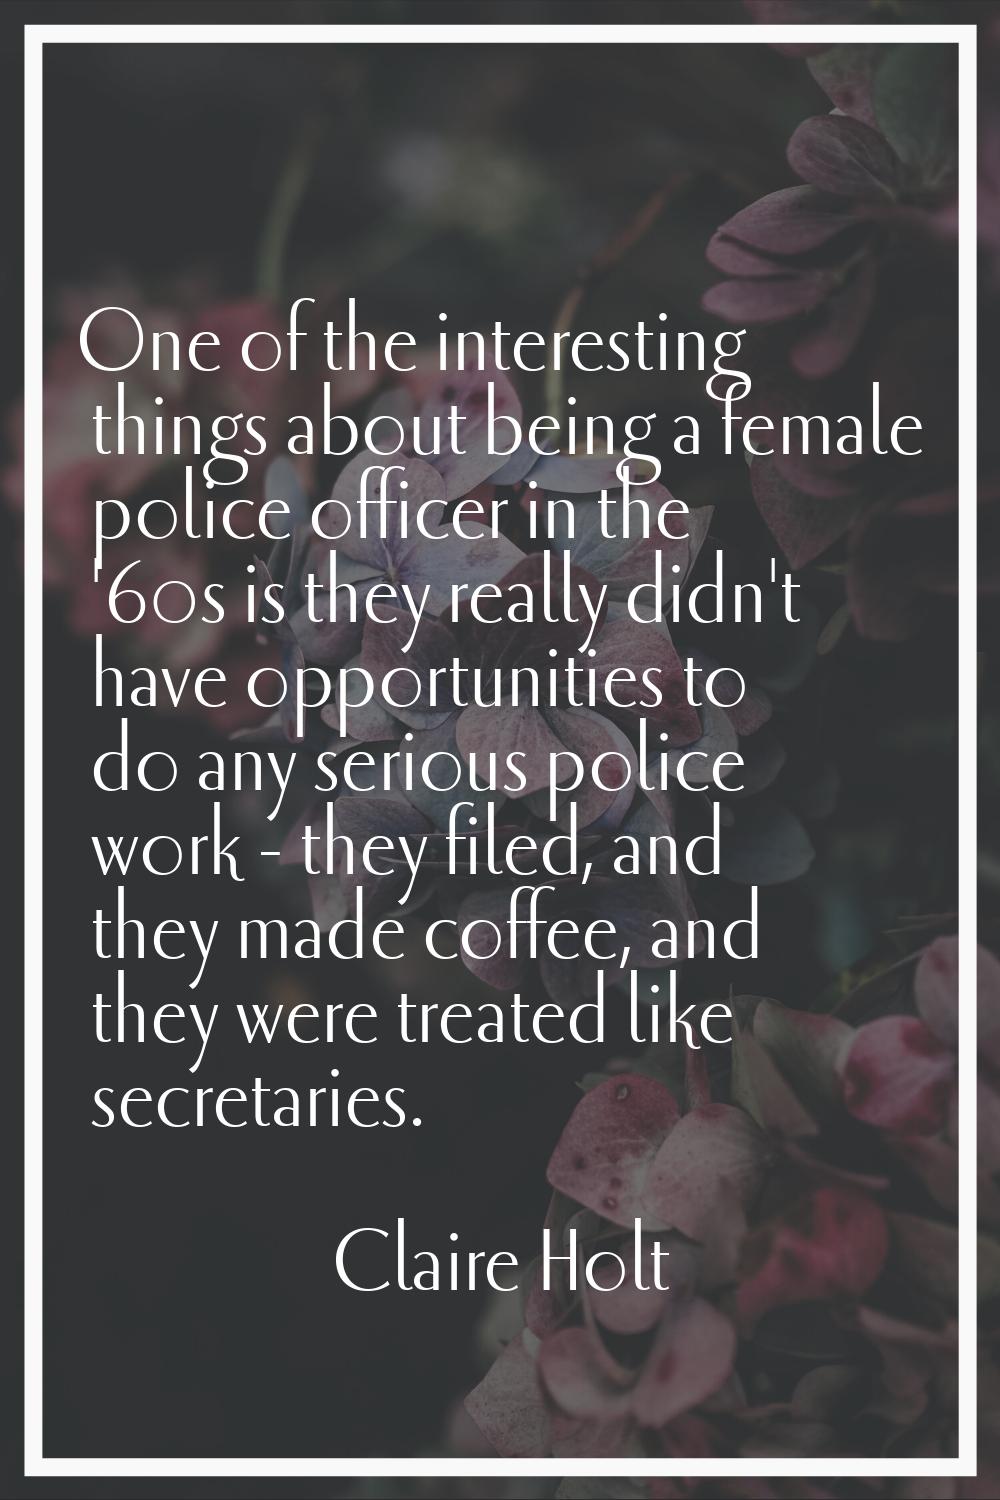 One of the interesting things about being a female police officer in the '60s is they really didn't